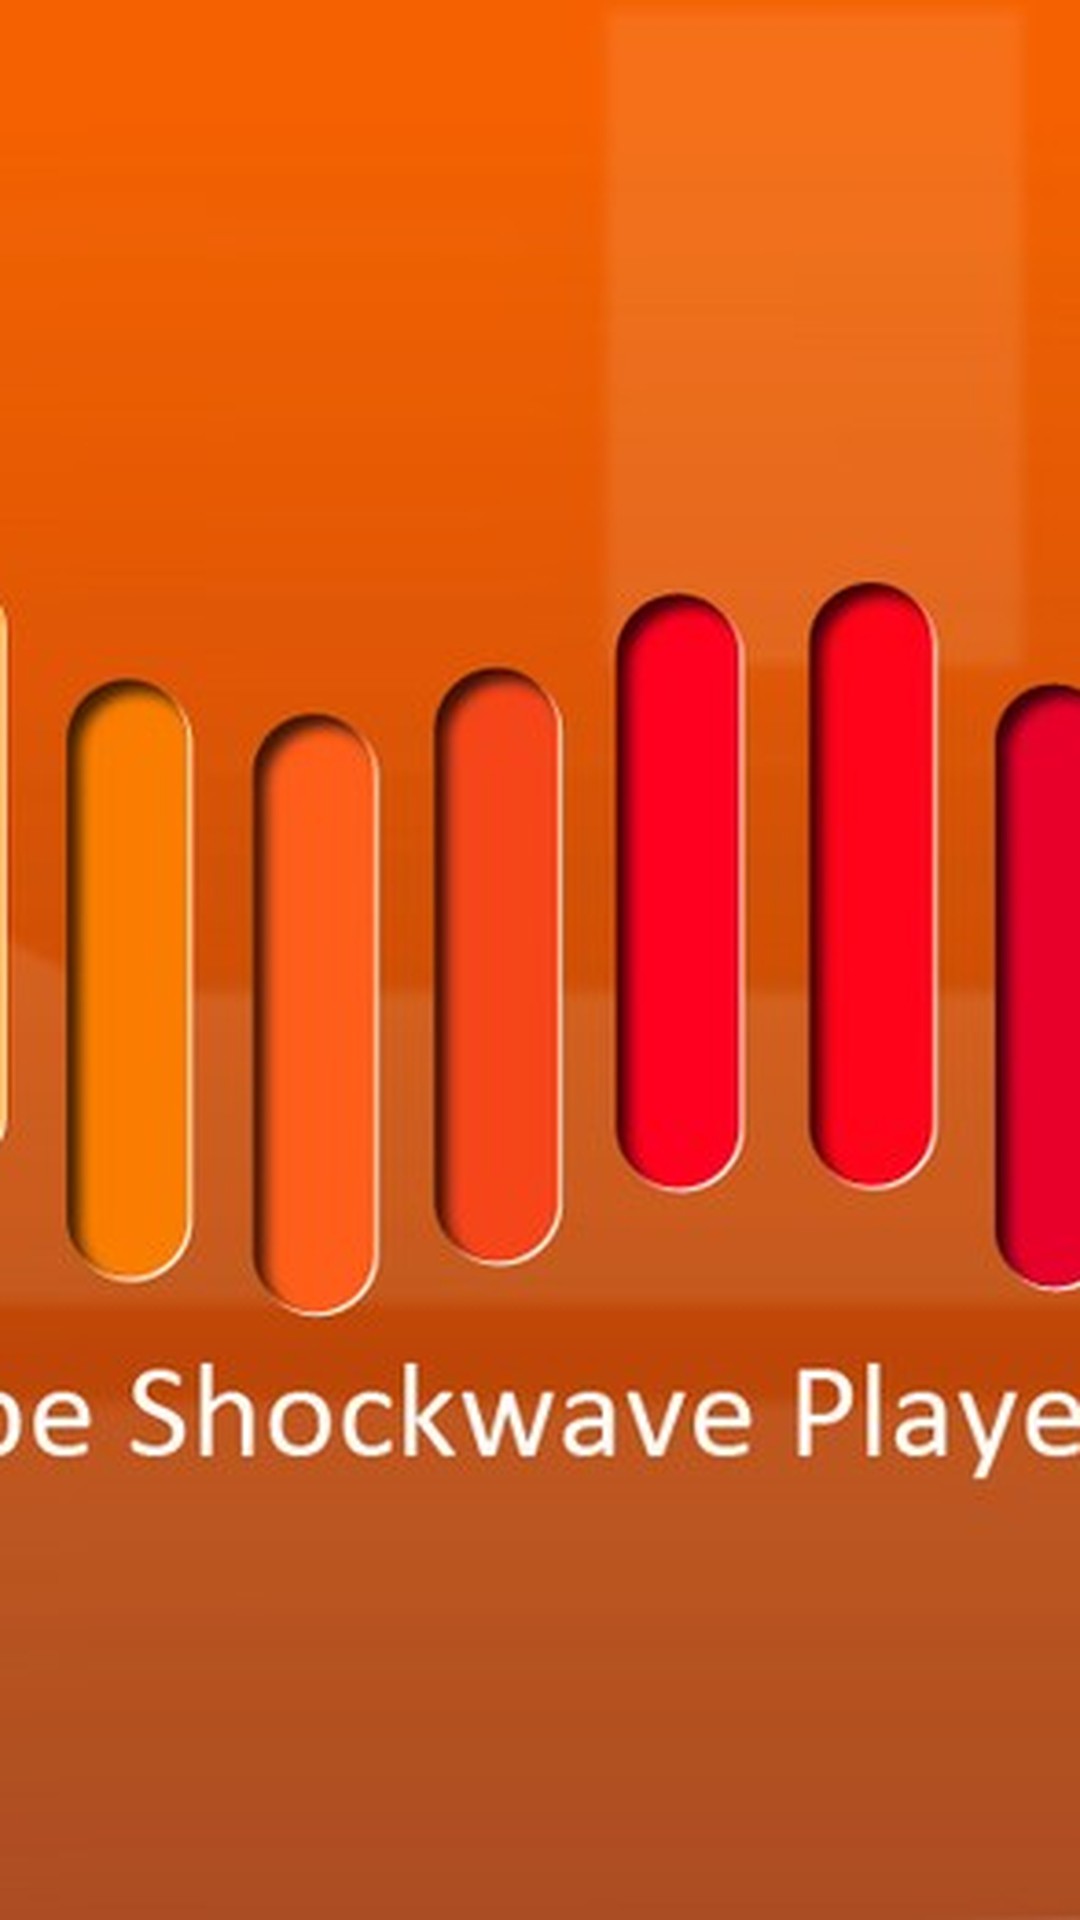 Android Apps by Shockwave Games on Google Play